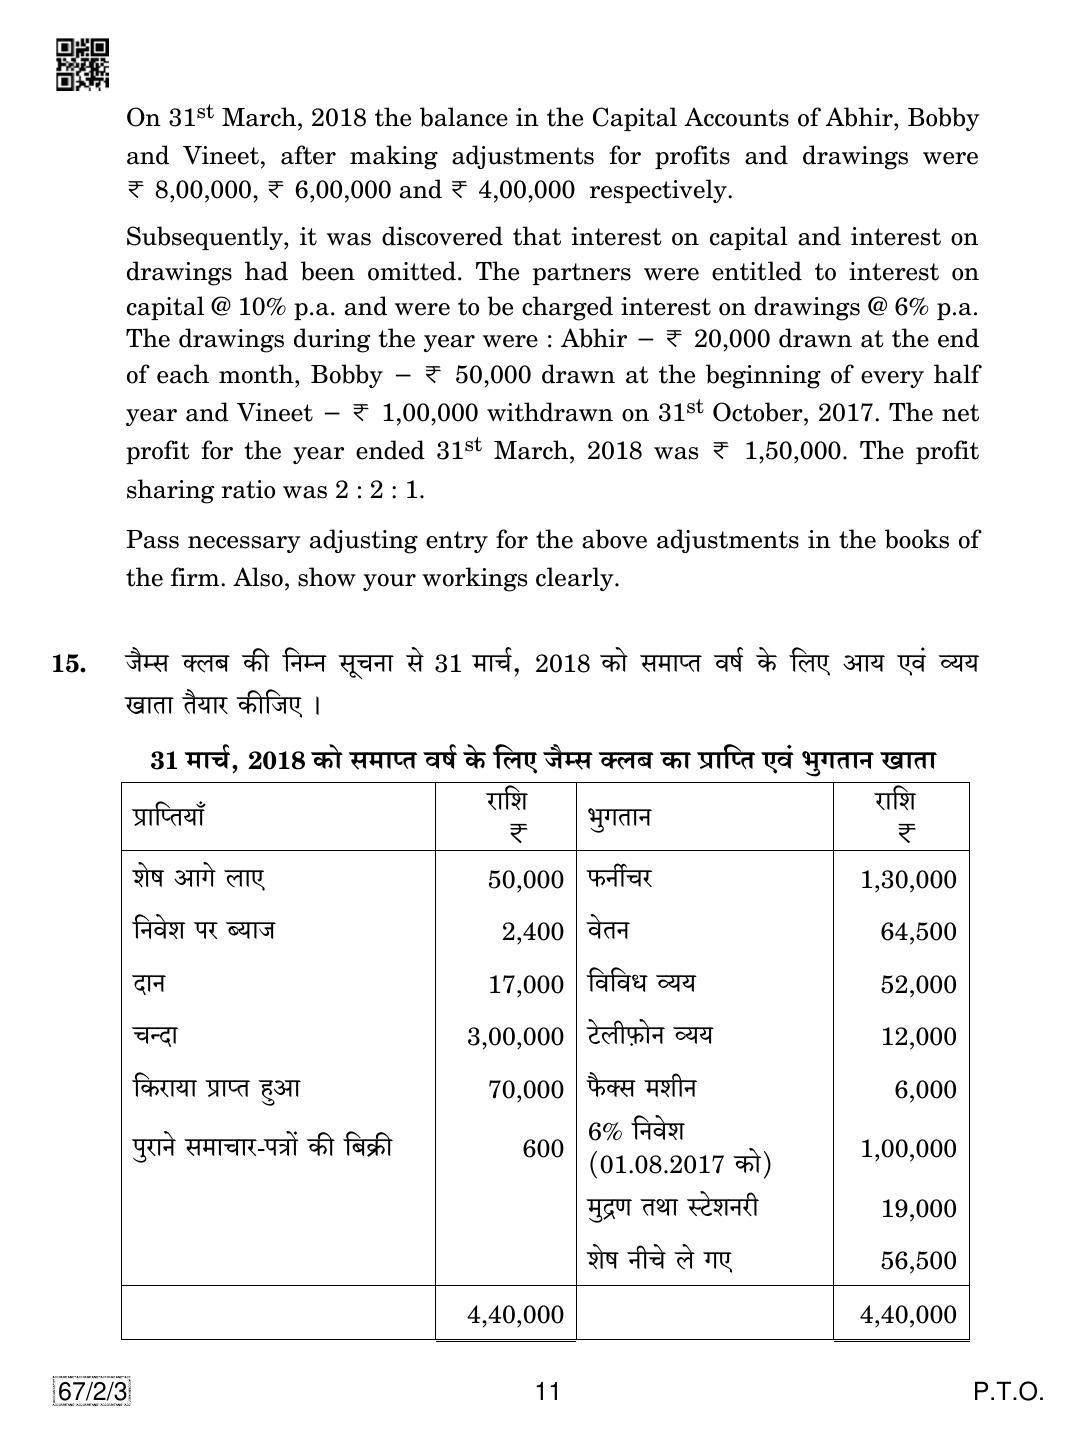 CBSE Class 12 67-2-3 Accountancy 2019 Question Paper - Page 11